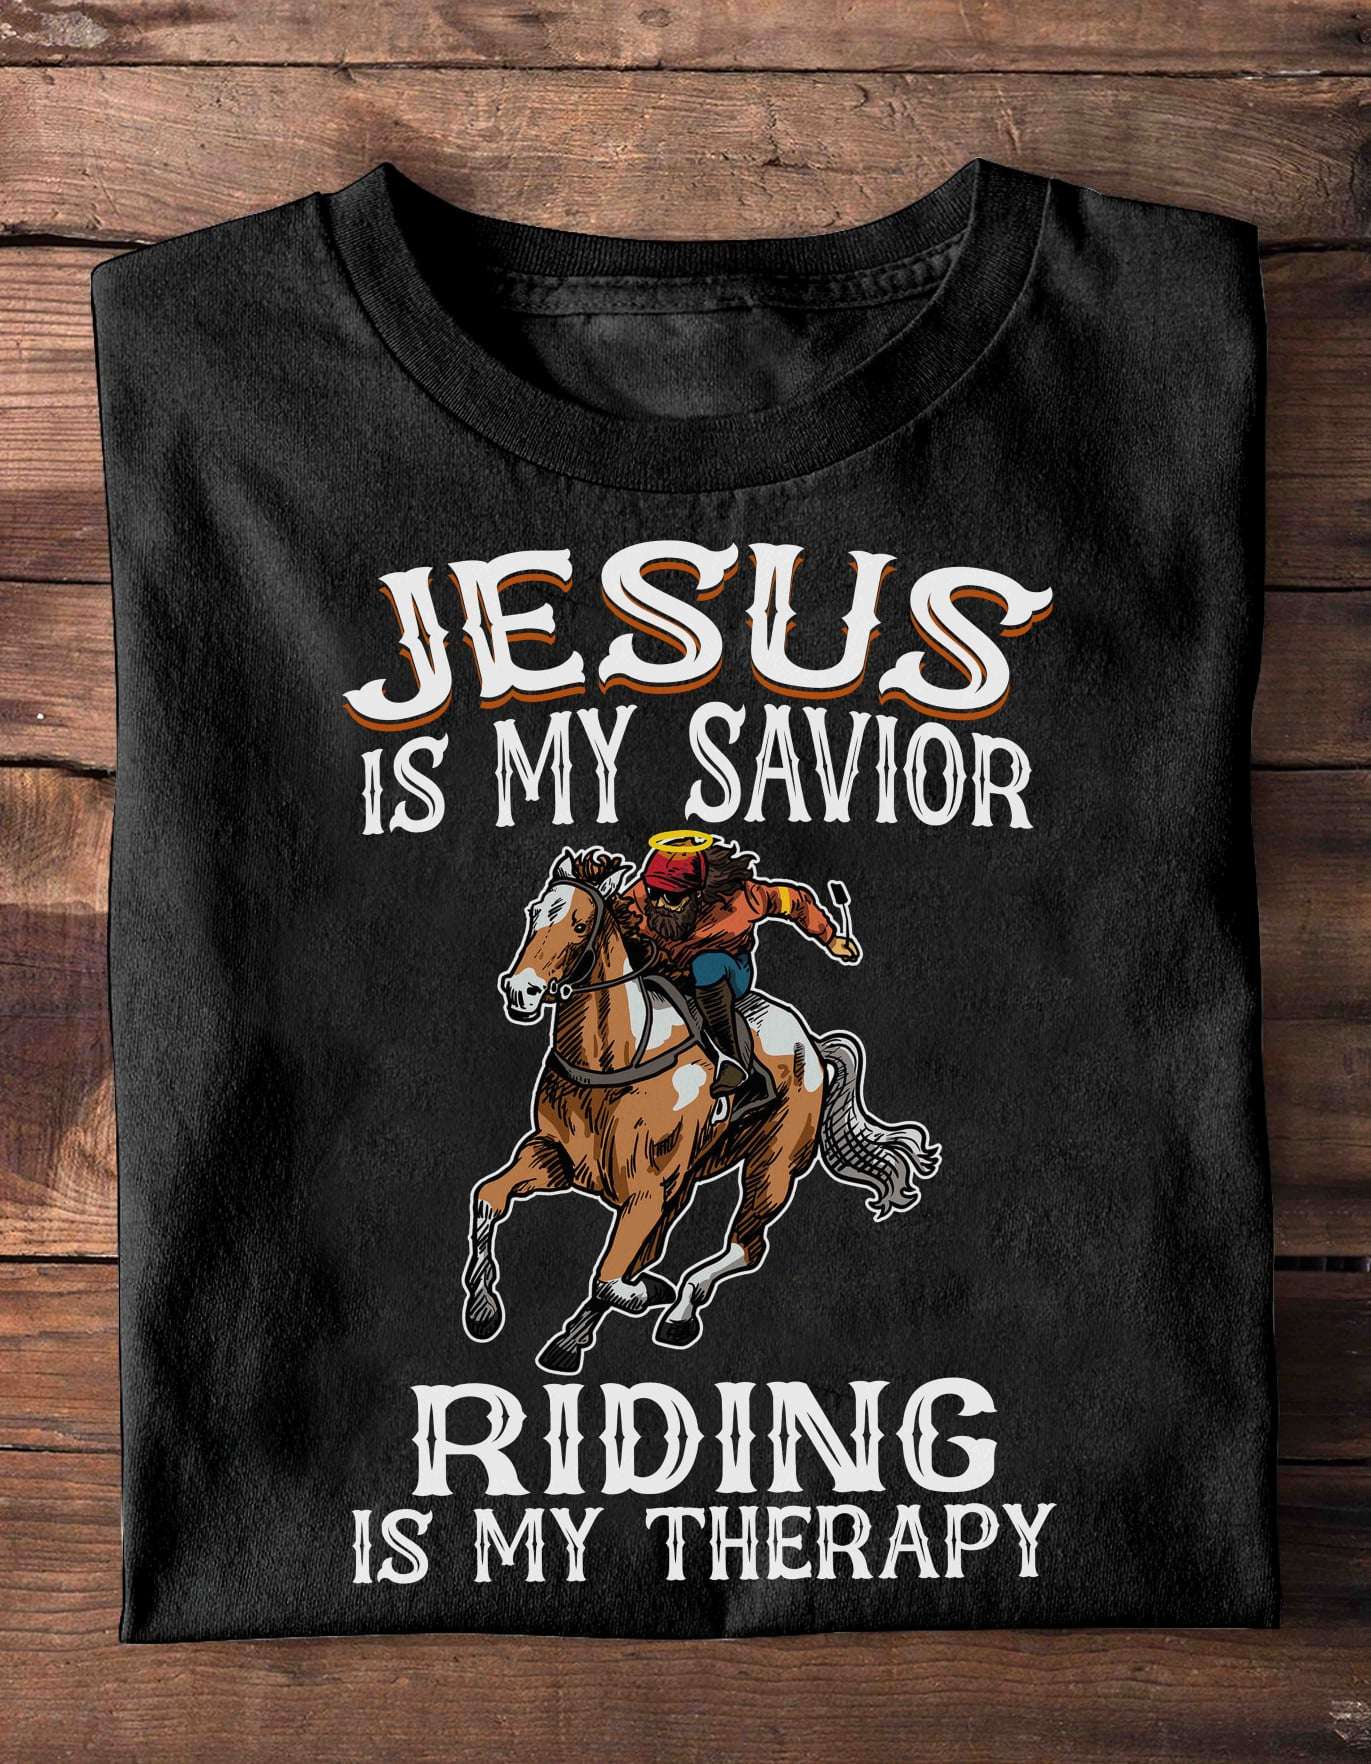 jesus is my savior, riding is my therapy - Jesus and riding, horse riding man